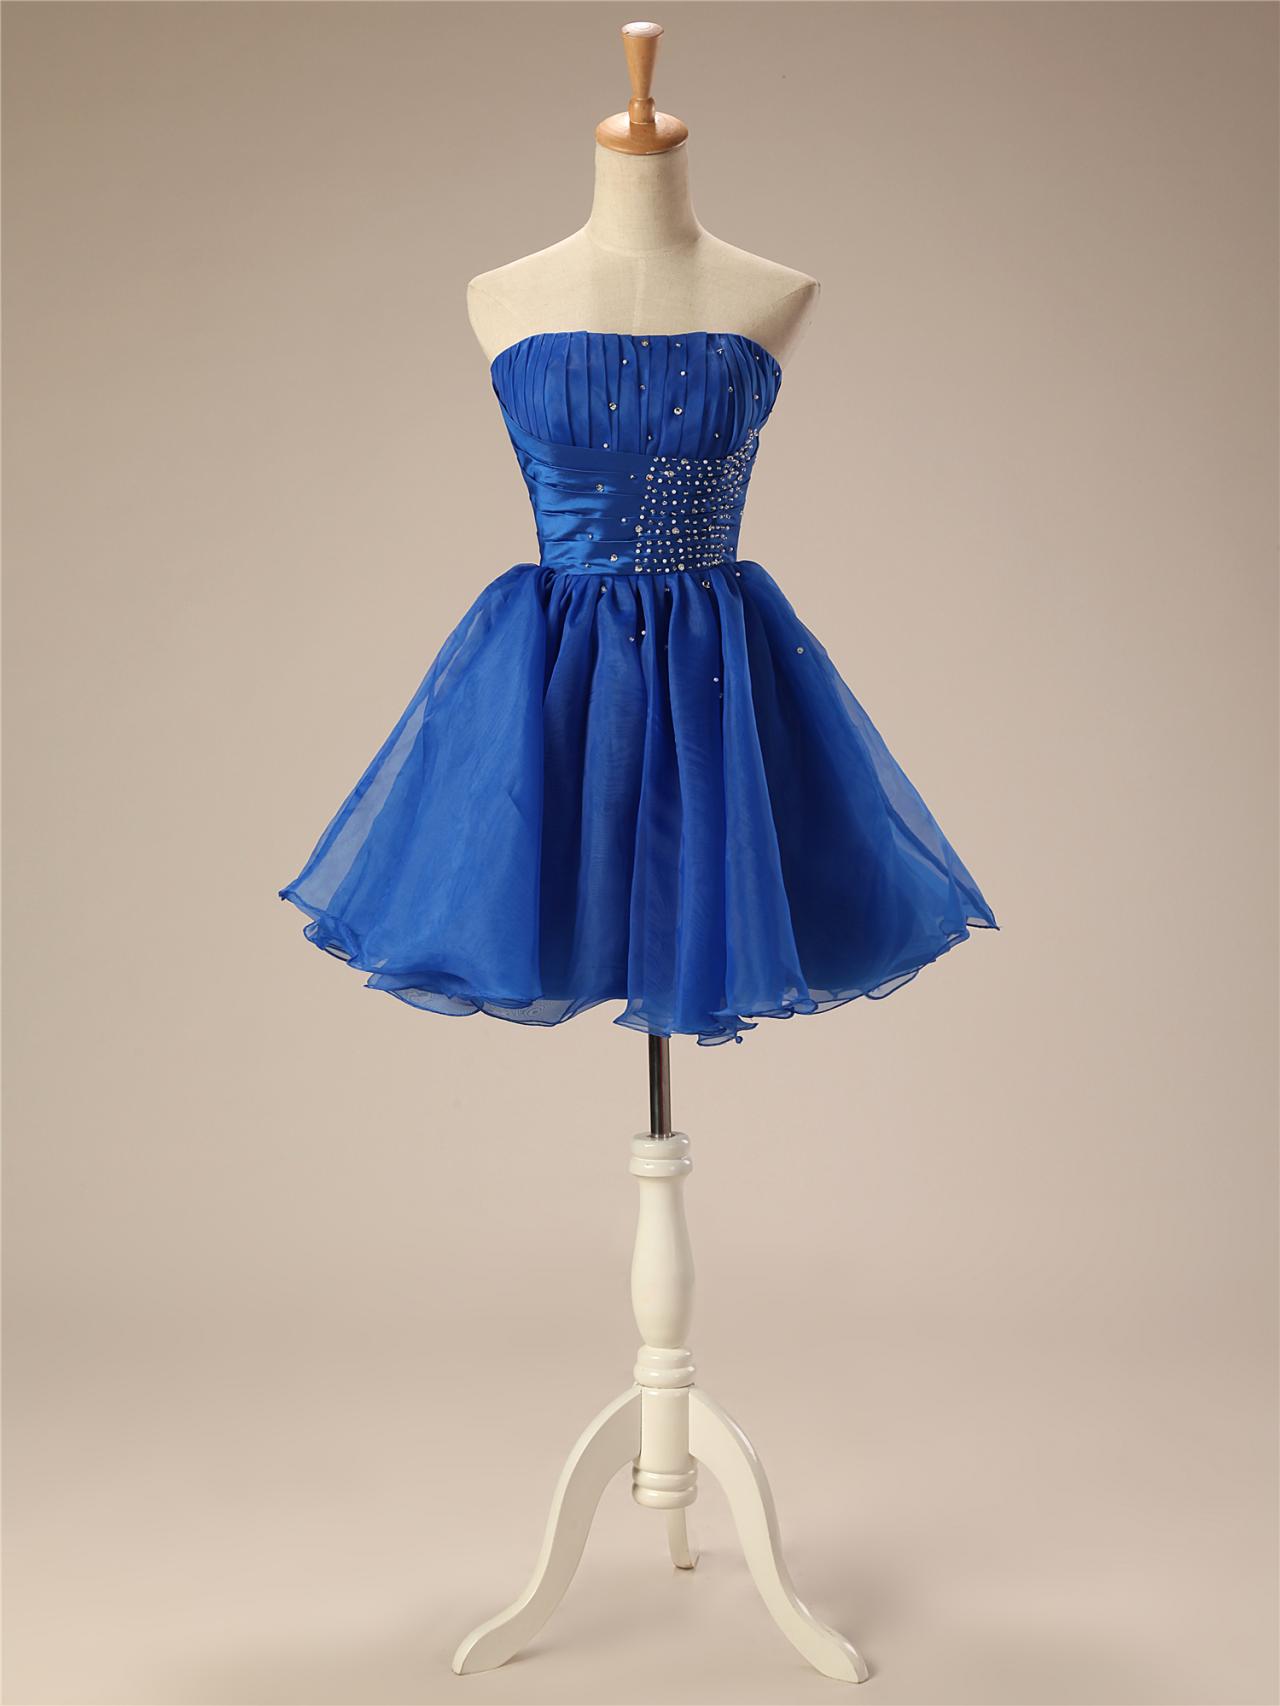 Homecoming Dress,organza Homecoming Dresses,beaded Short Homecoming Dresses, Short Party Dresses,cocktail Dresses,prom Gowns,royal Blue